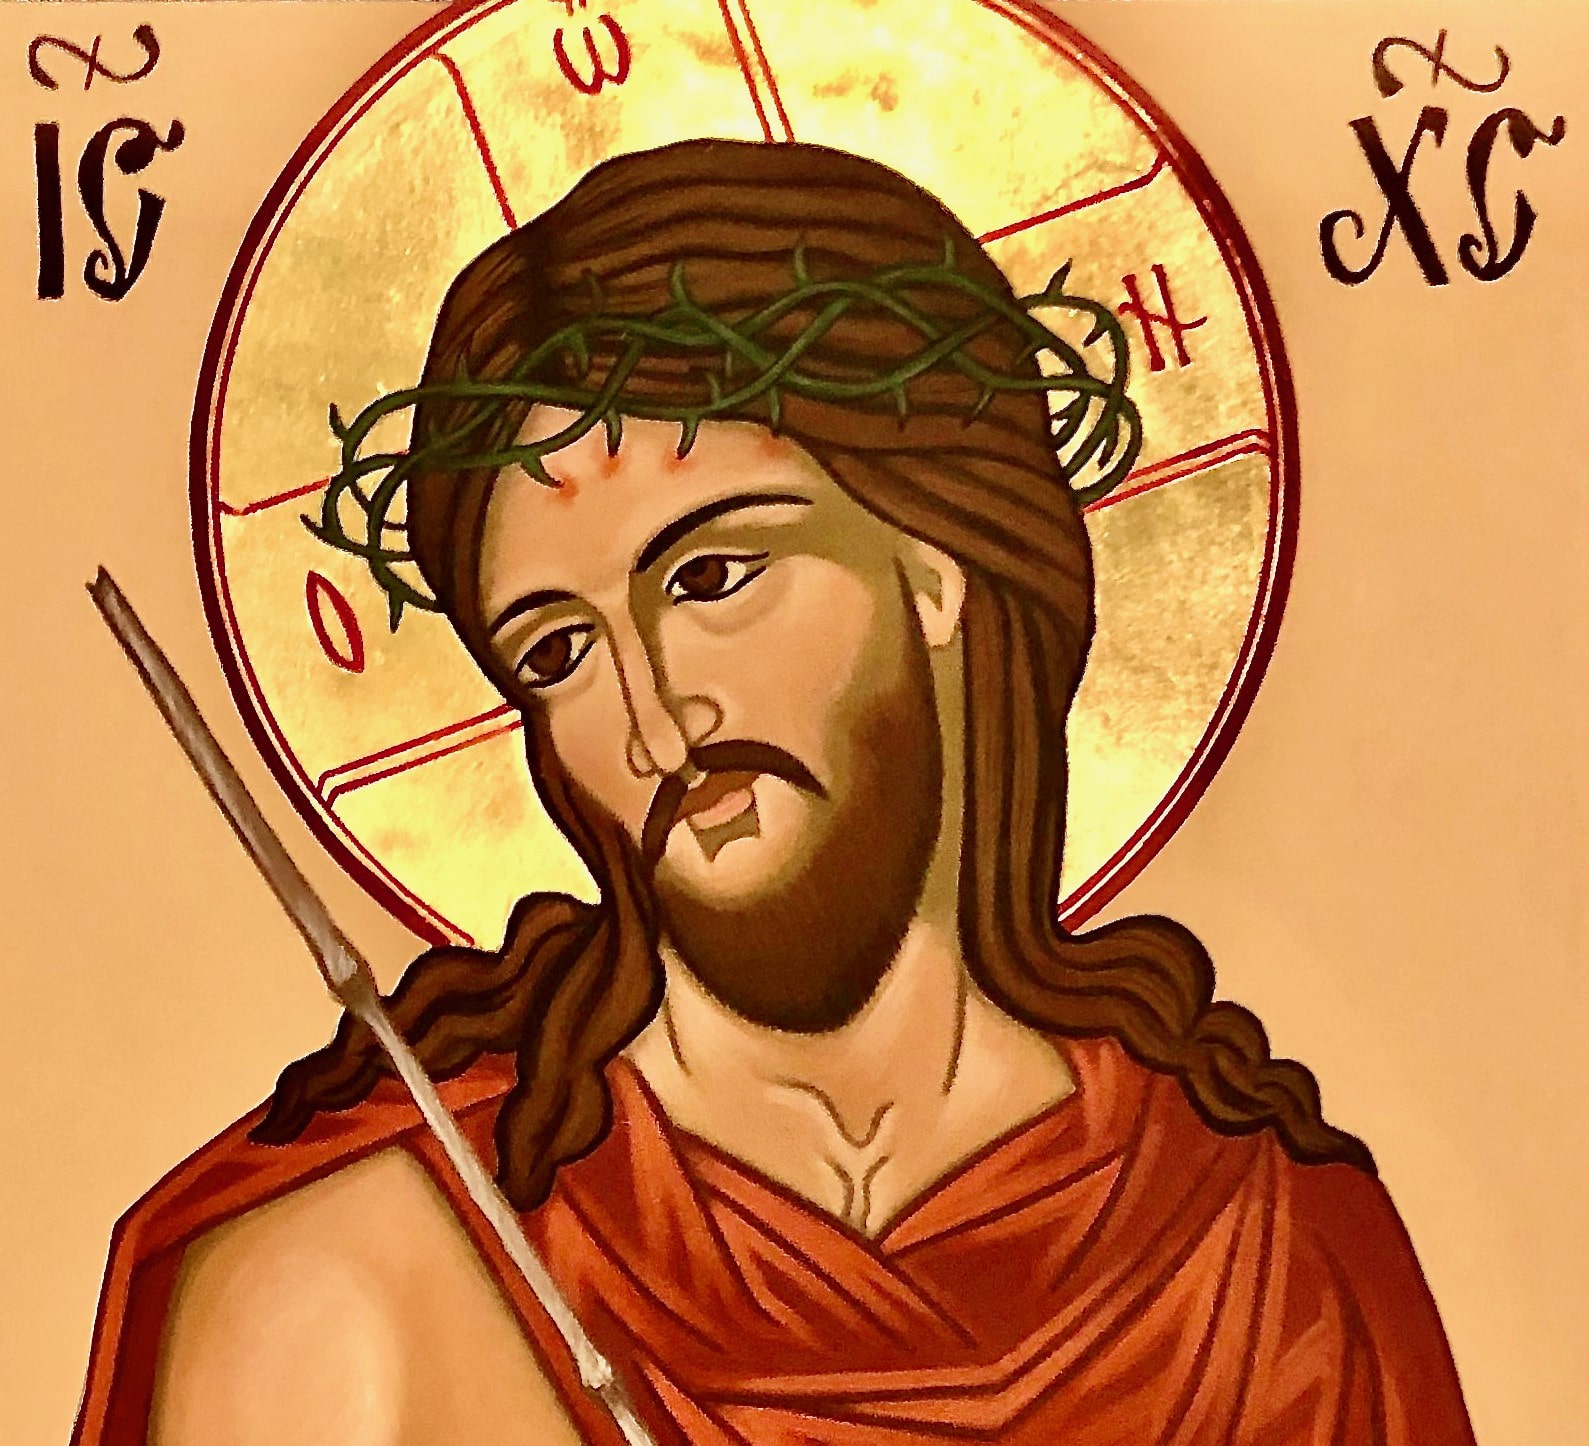 Jesus Christ, IC XC, Bridegroom, Savior, Son of God, 2nd Person in the Holy Trinity